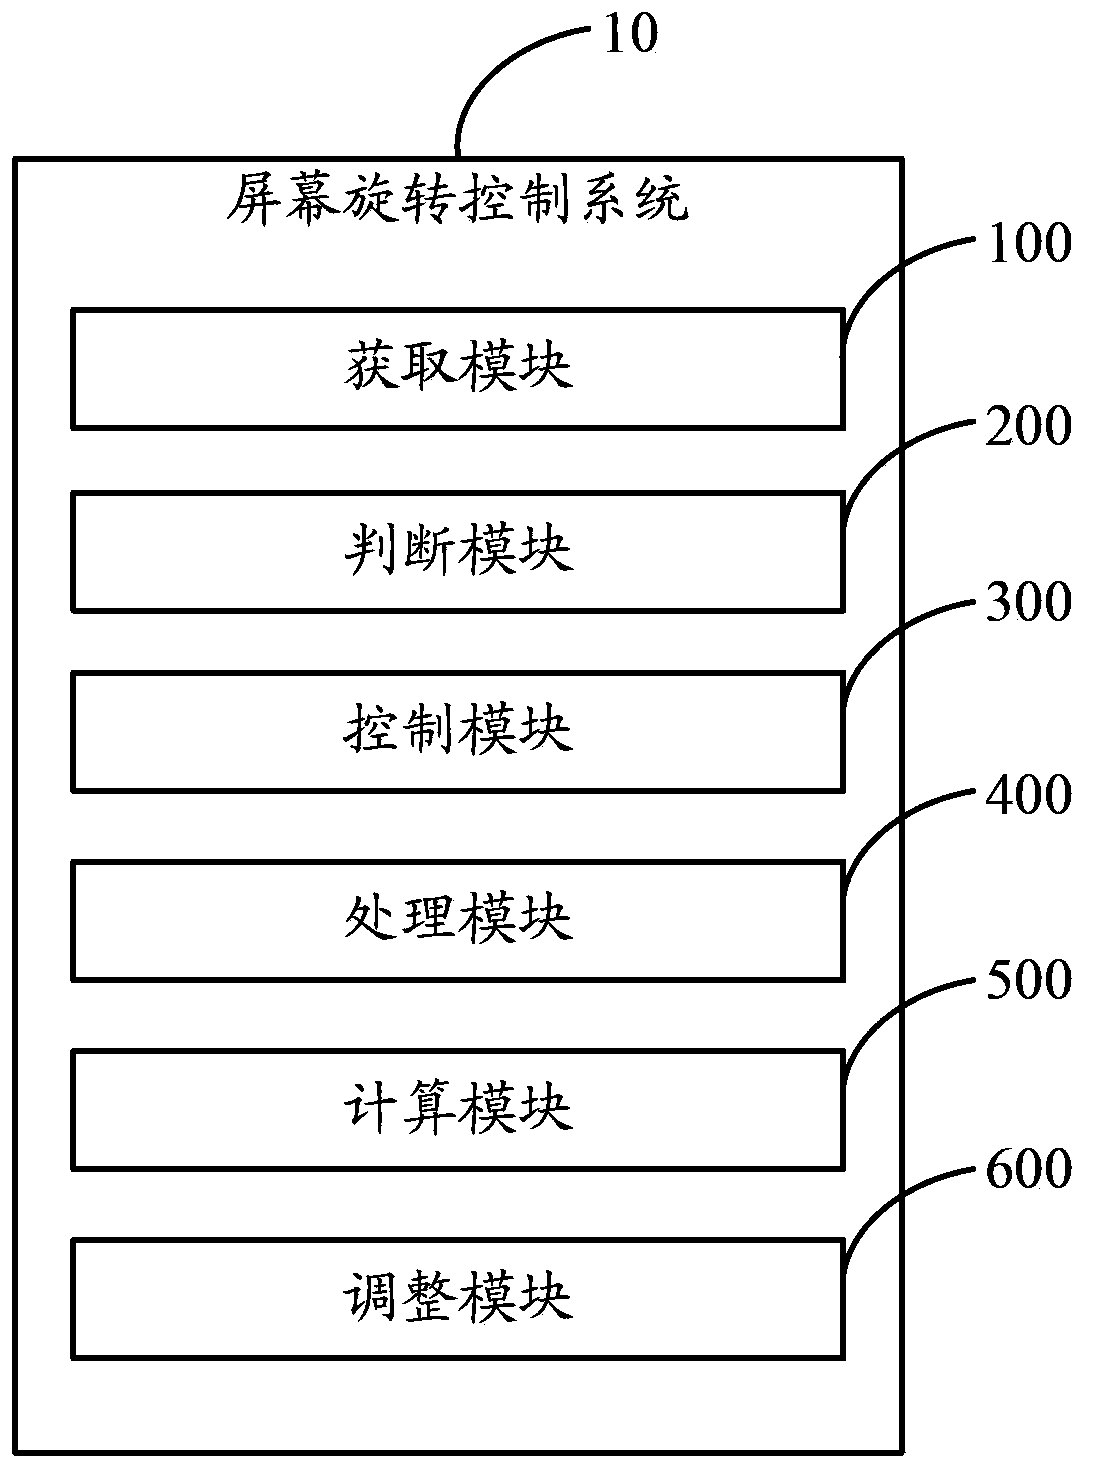 Screen rotation control method and system